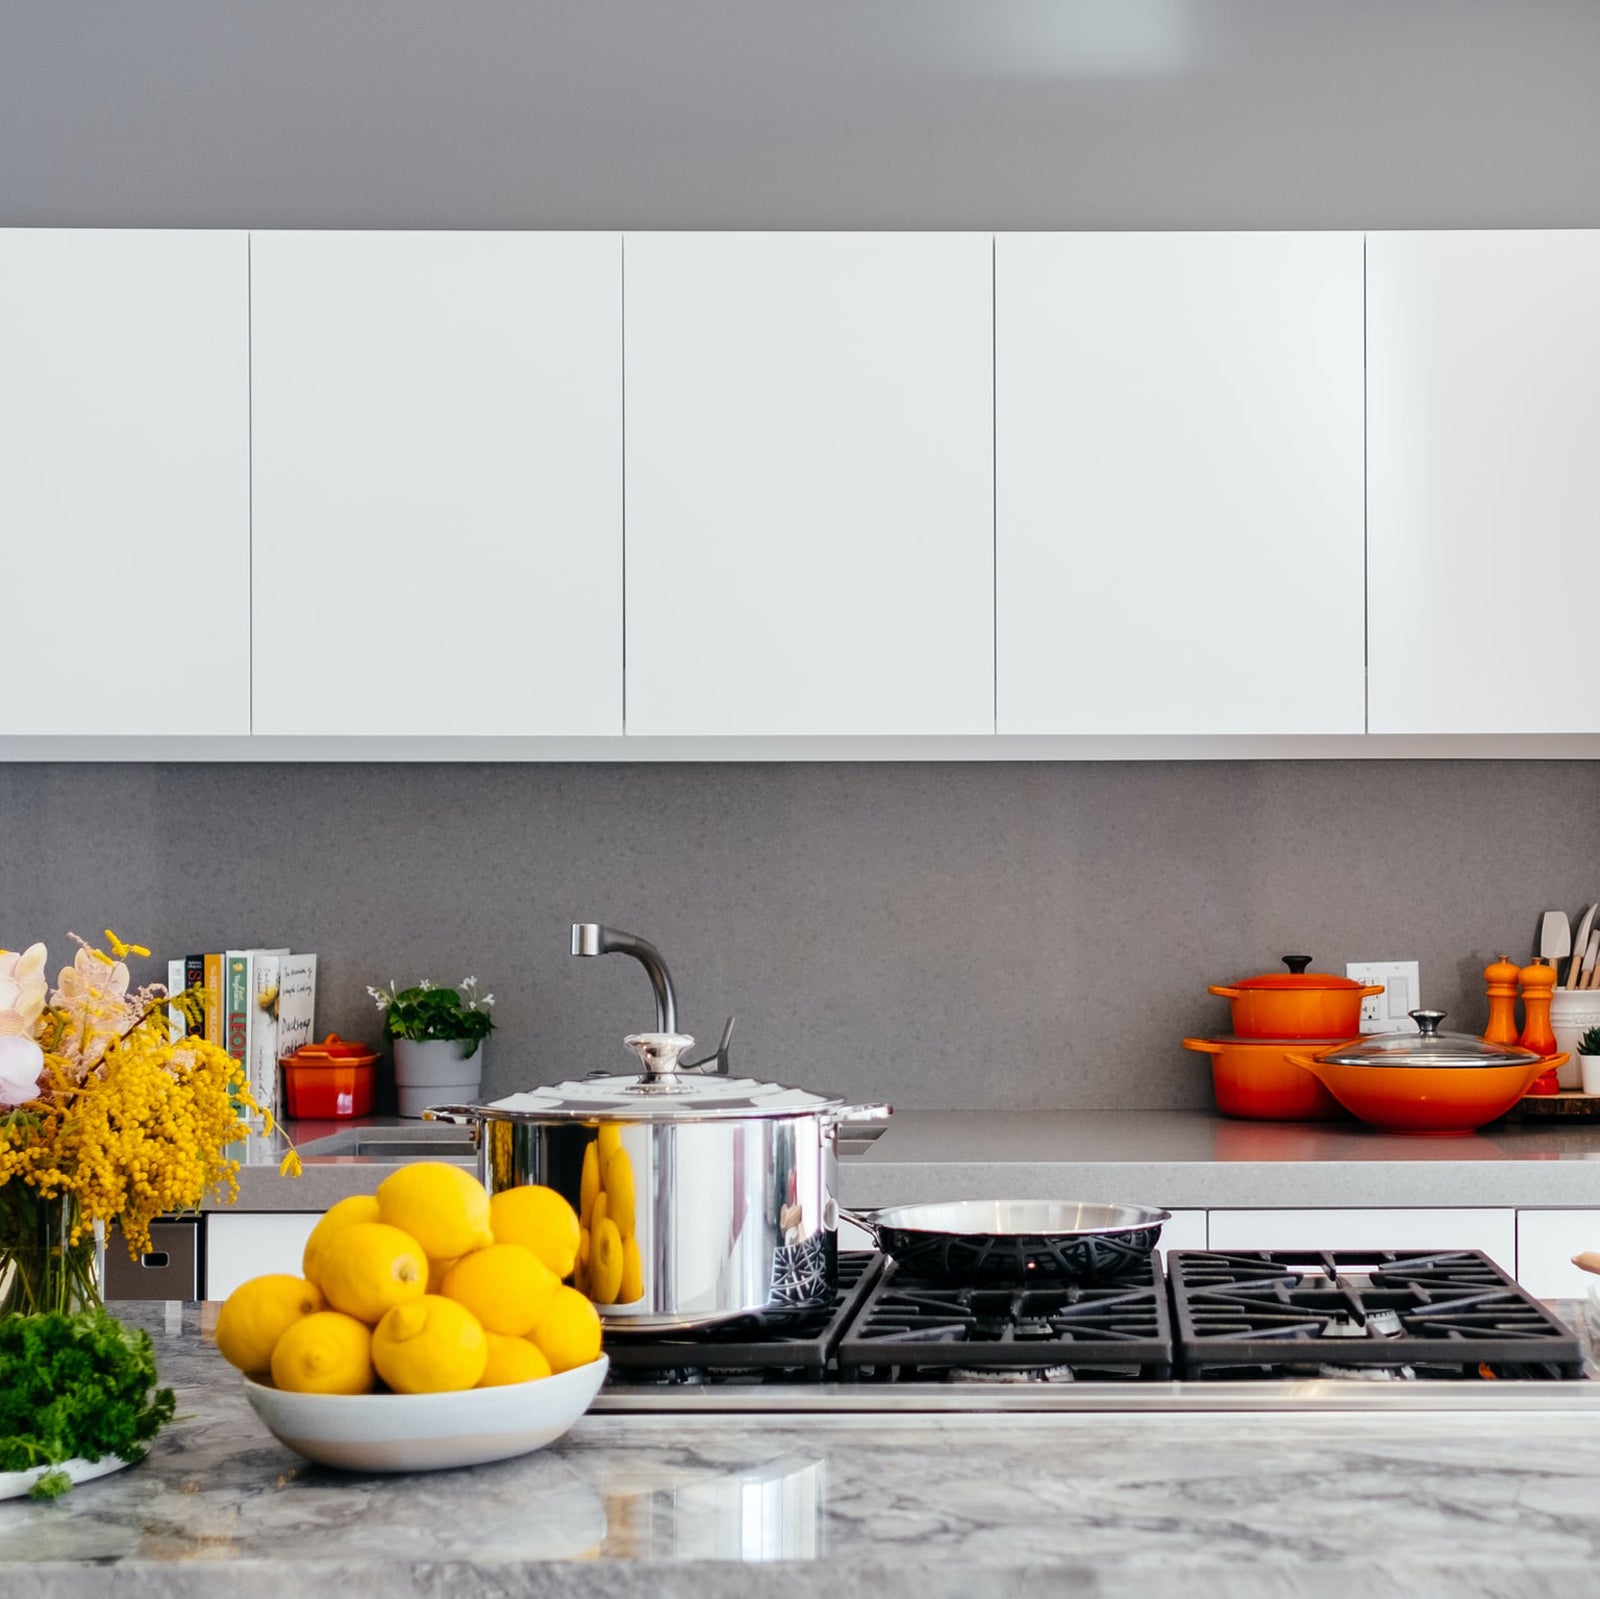 Three Ways To Make Your Kitchen More Sustainable